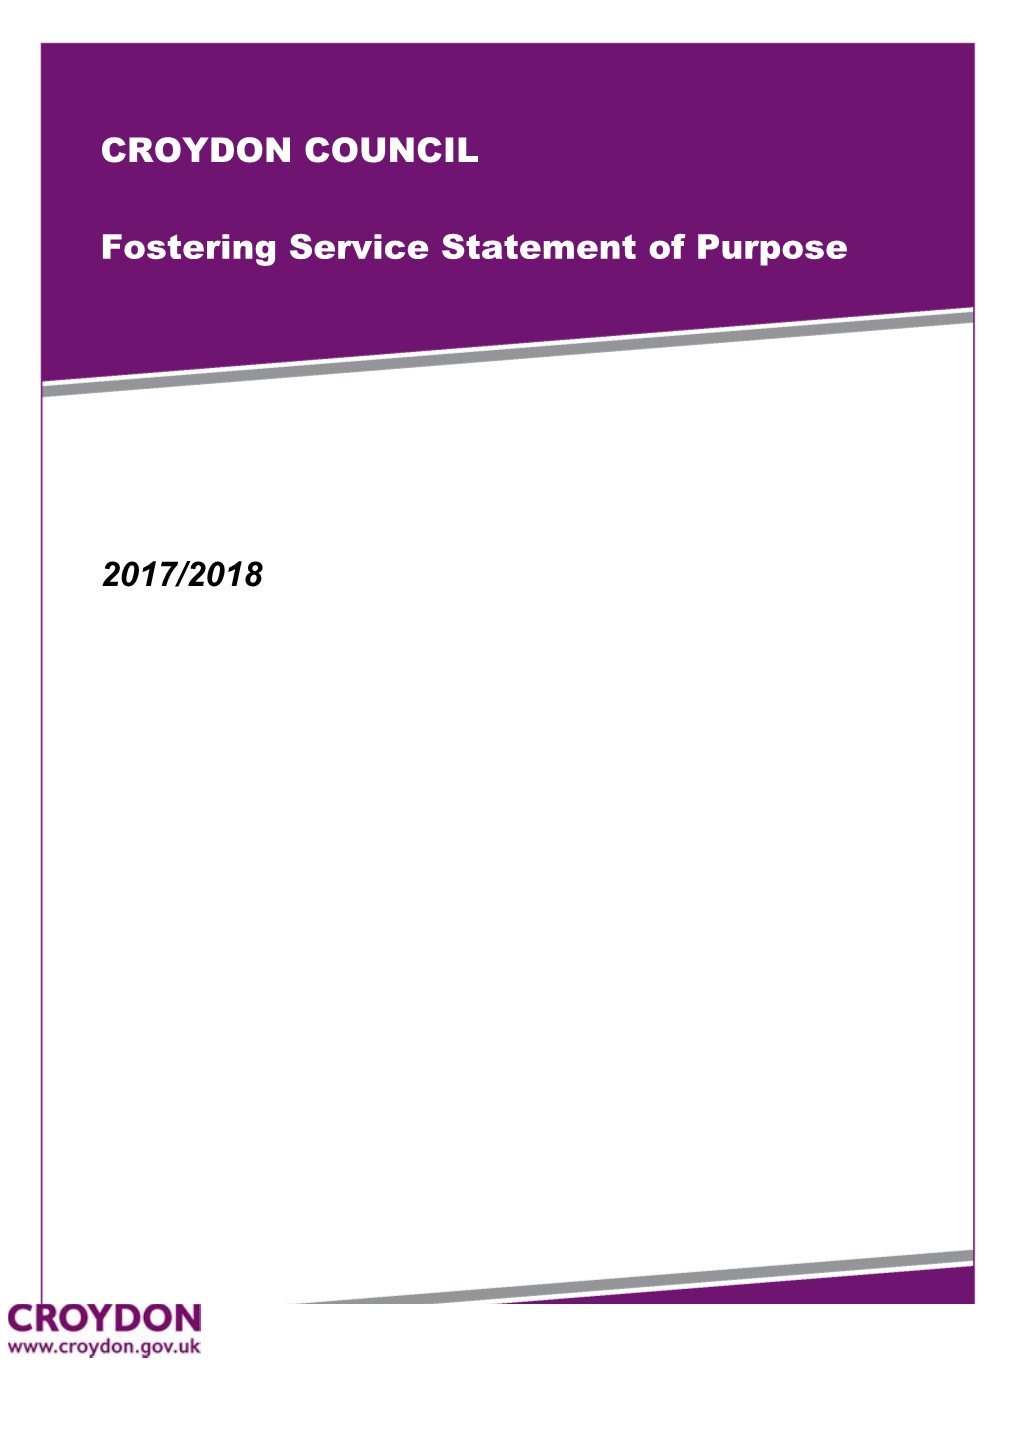 Fostering Service Statement of Purpose 2017/2018